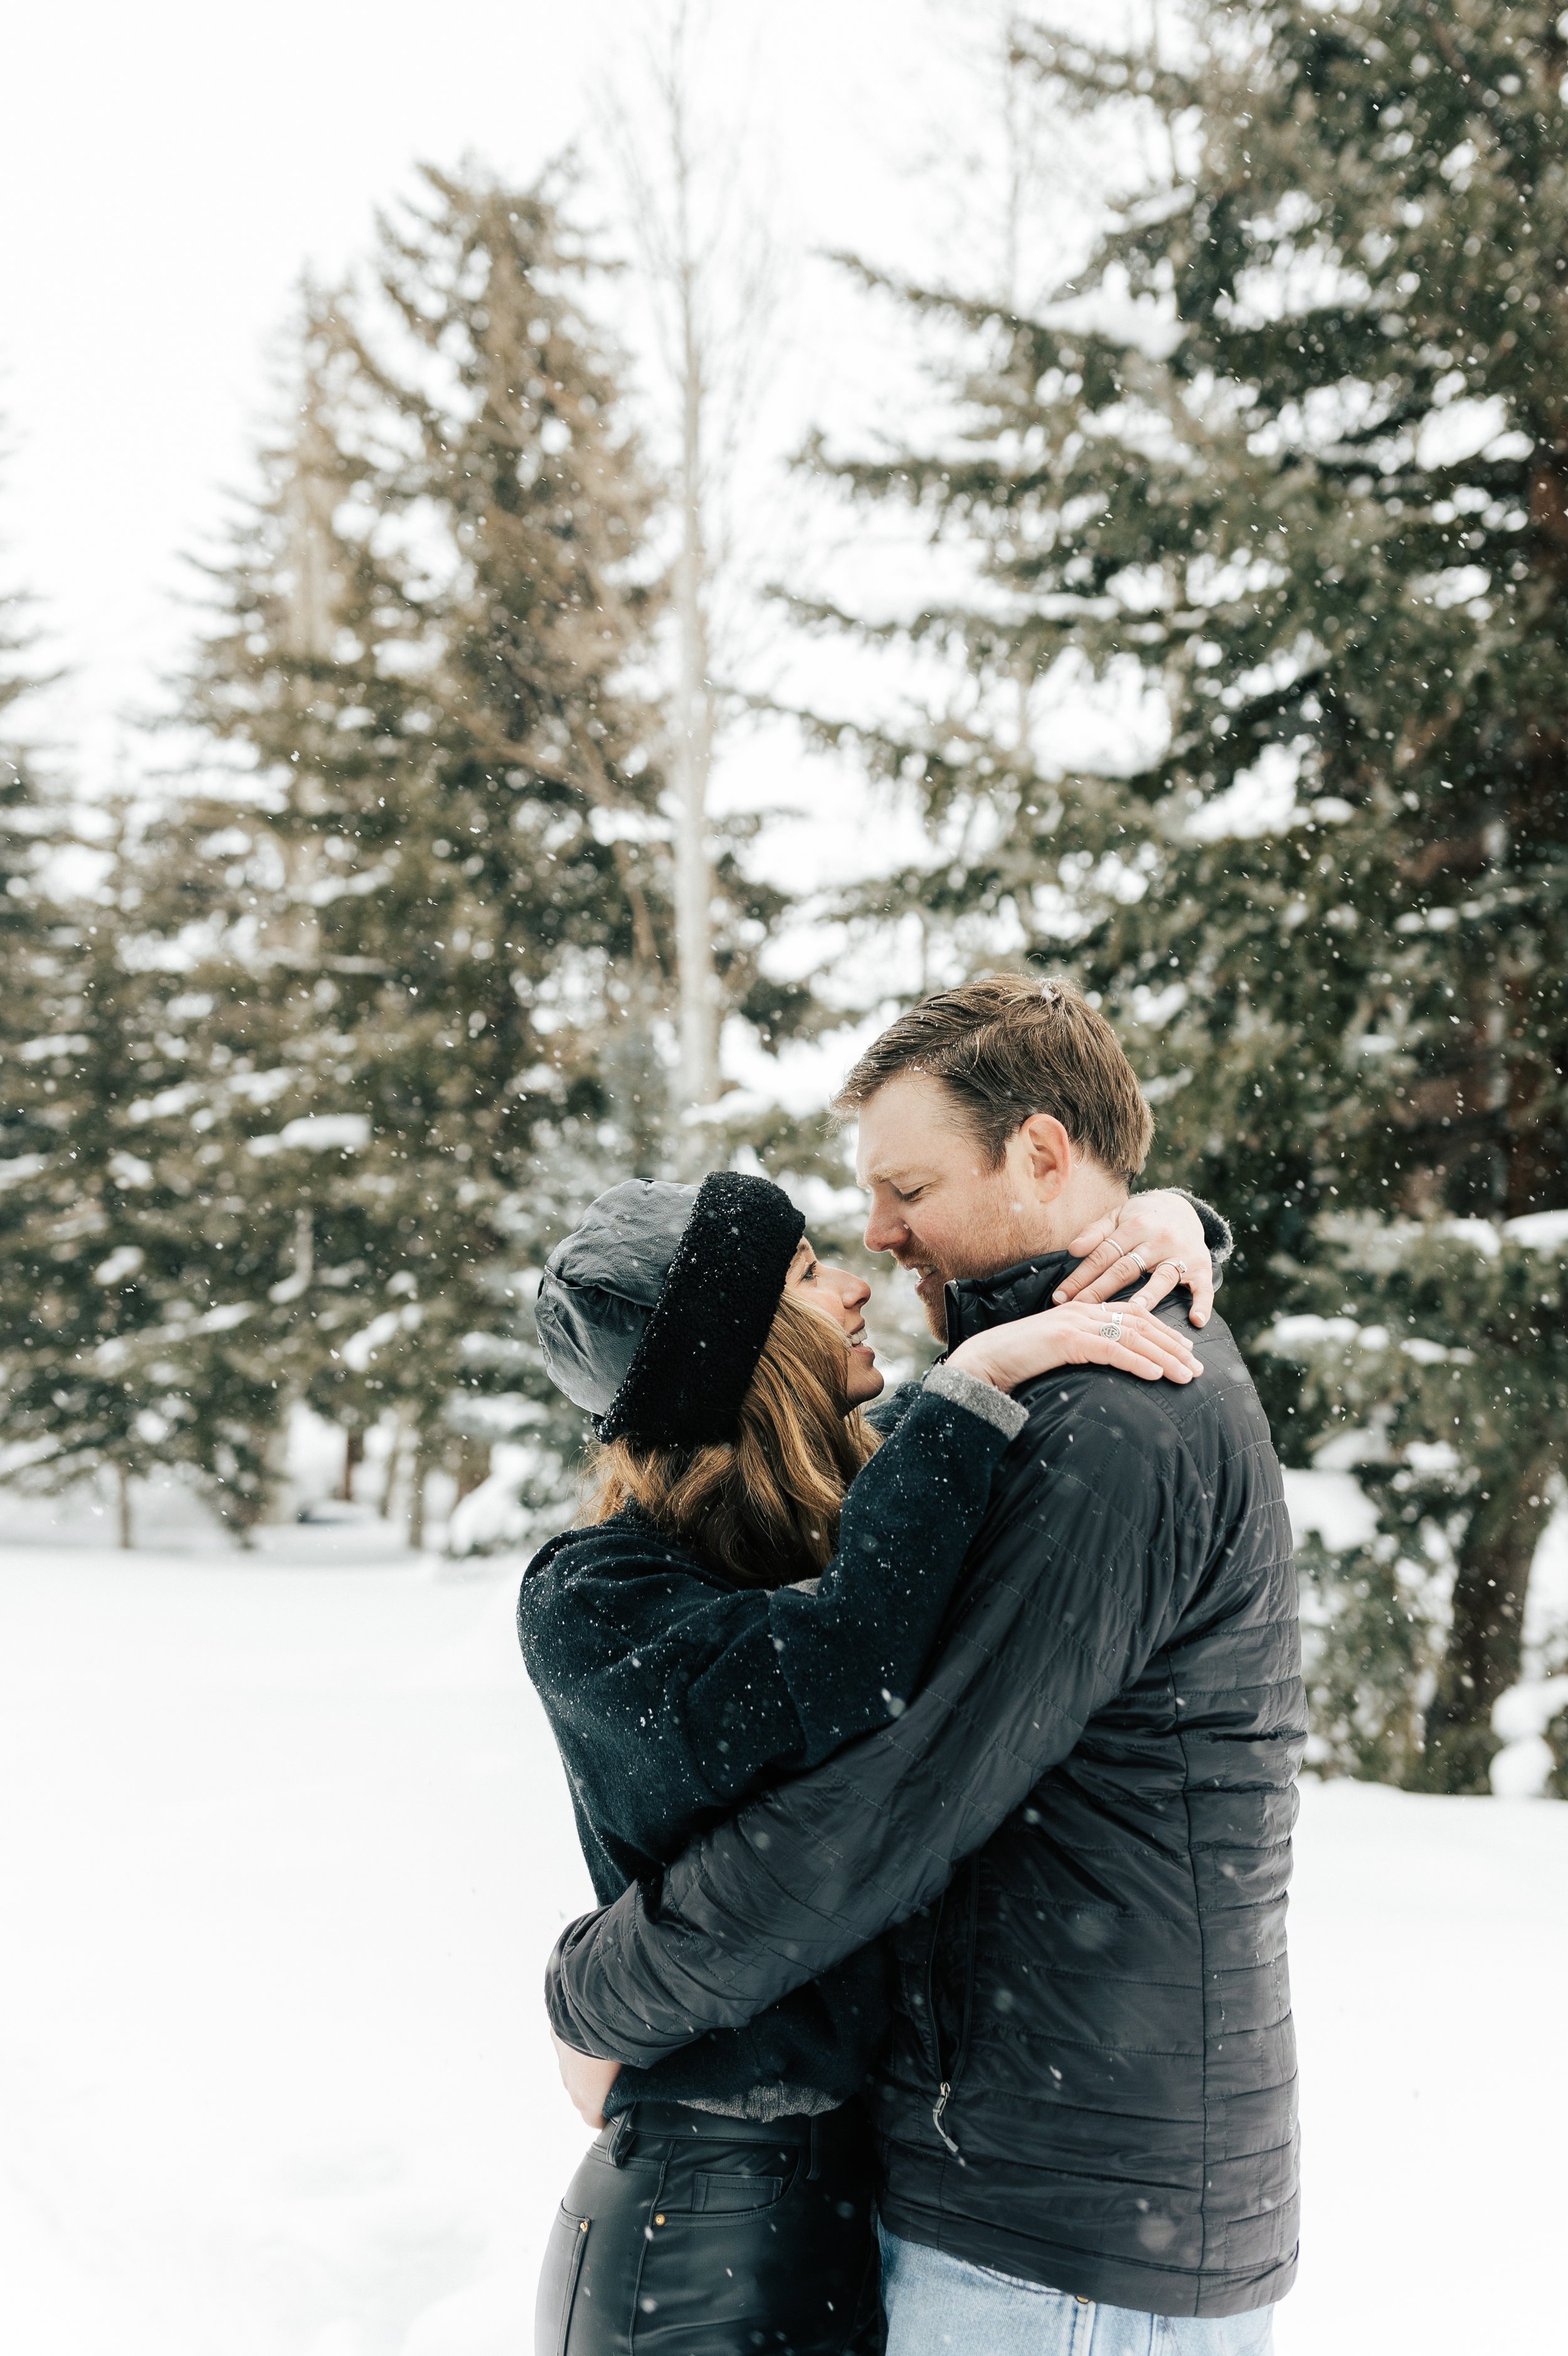  Newly engaged couple kiss. Winter engagement session in Park City, Utah. Boyfriend surprises girlfriend with wedding proposal during a snowy photoshoot. Man proposes to girlfriend. Winter couple outfit inspo. #parkcity #engagements #engagementsessio